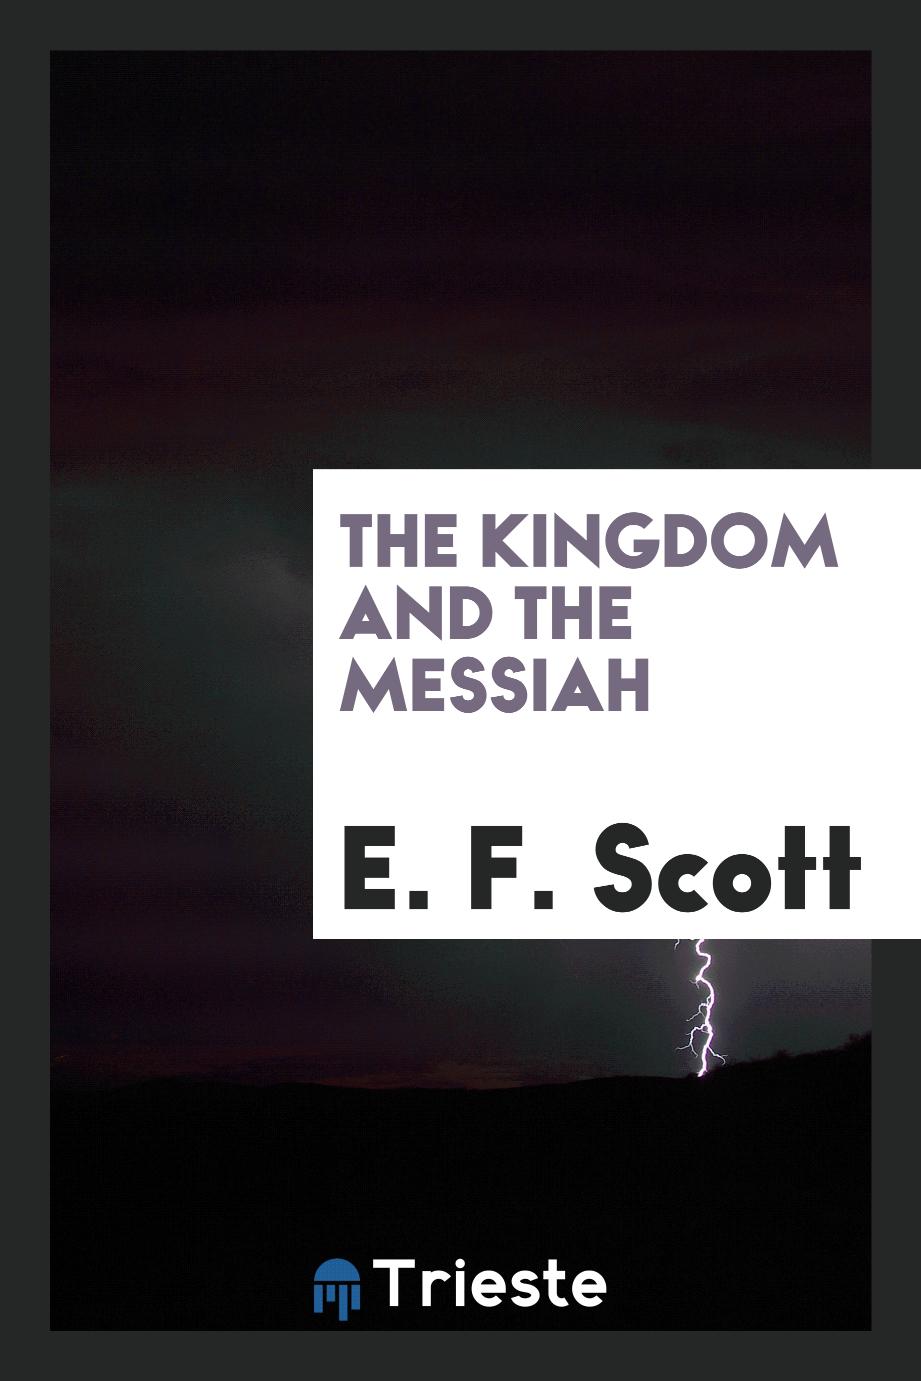 The kingdom and the messiah